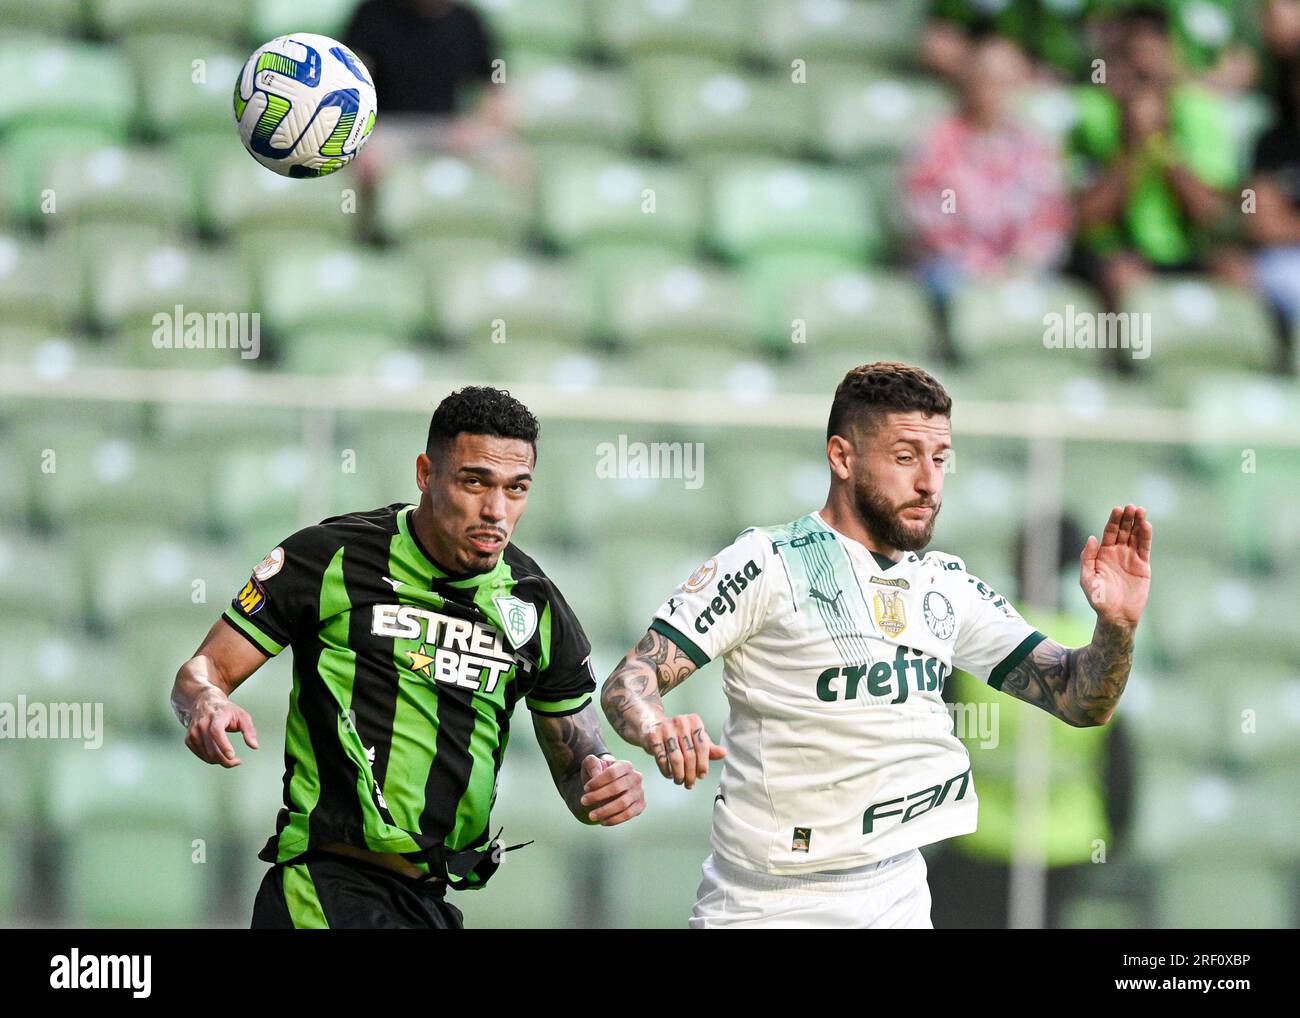 Belo Horizonte, Brazil. 30th July, 2023. Eder of America Mineiro battles for possession ball with Ze Rafael of Palmeiras, during the match between America Mineiro and Palmeiras, for the Brazilian Serie A 2023, at Arena Independencia, in Belo Horizonte on July 30. Photo: Gledston Tavares/DiaEsportivo/Alamy Live News Credit: DiaEsportivo/Alamy Live News Stock Photo